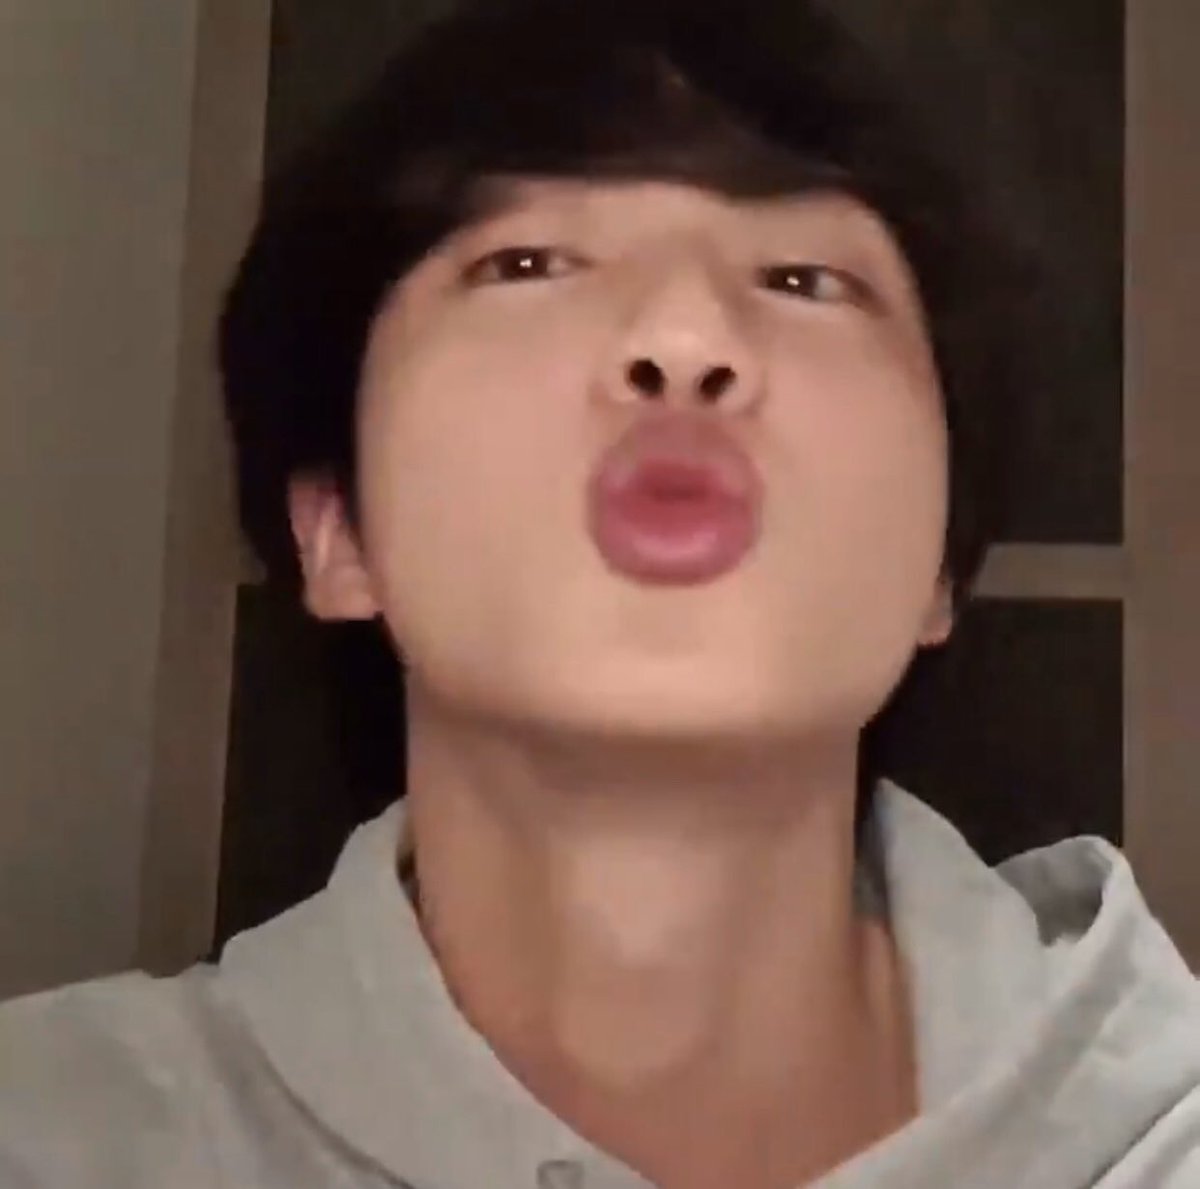 seokjin sending kisses whenever he finishes his vlive T^T he's the most precious